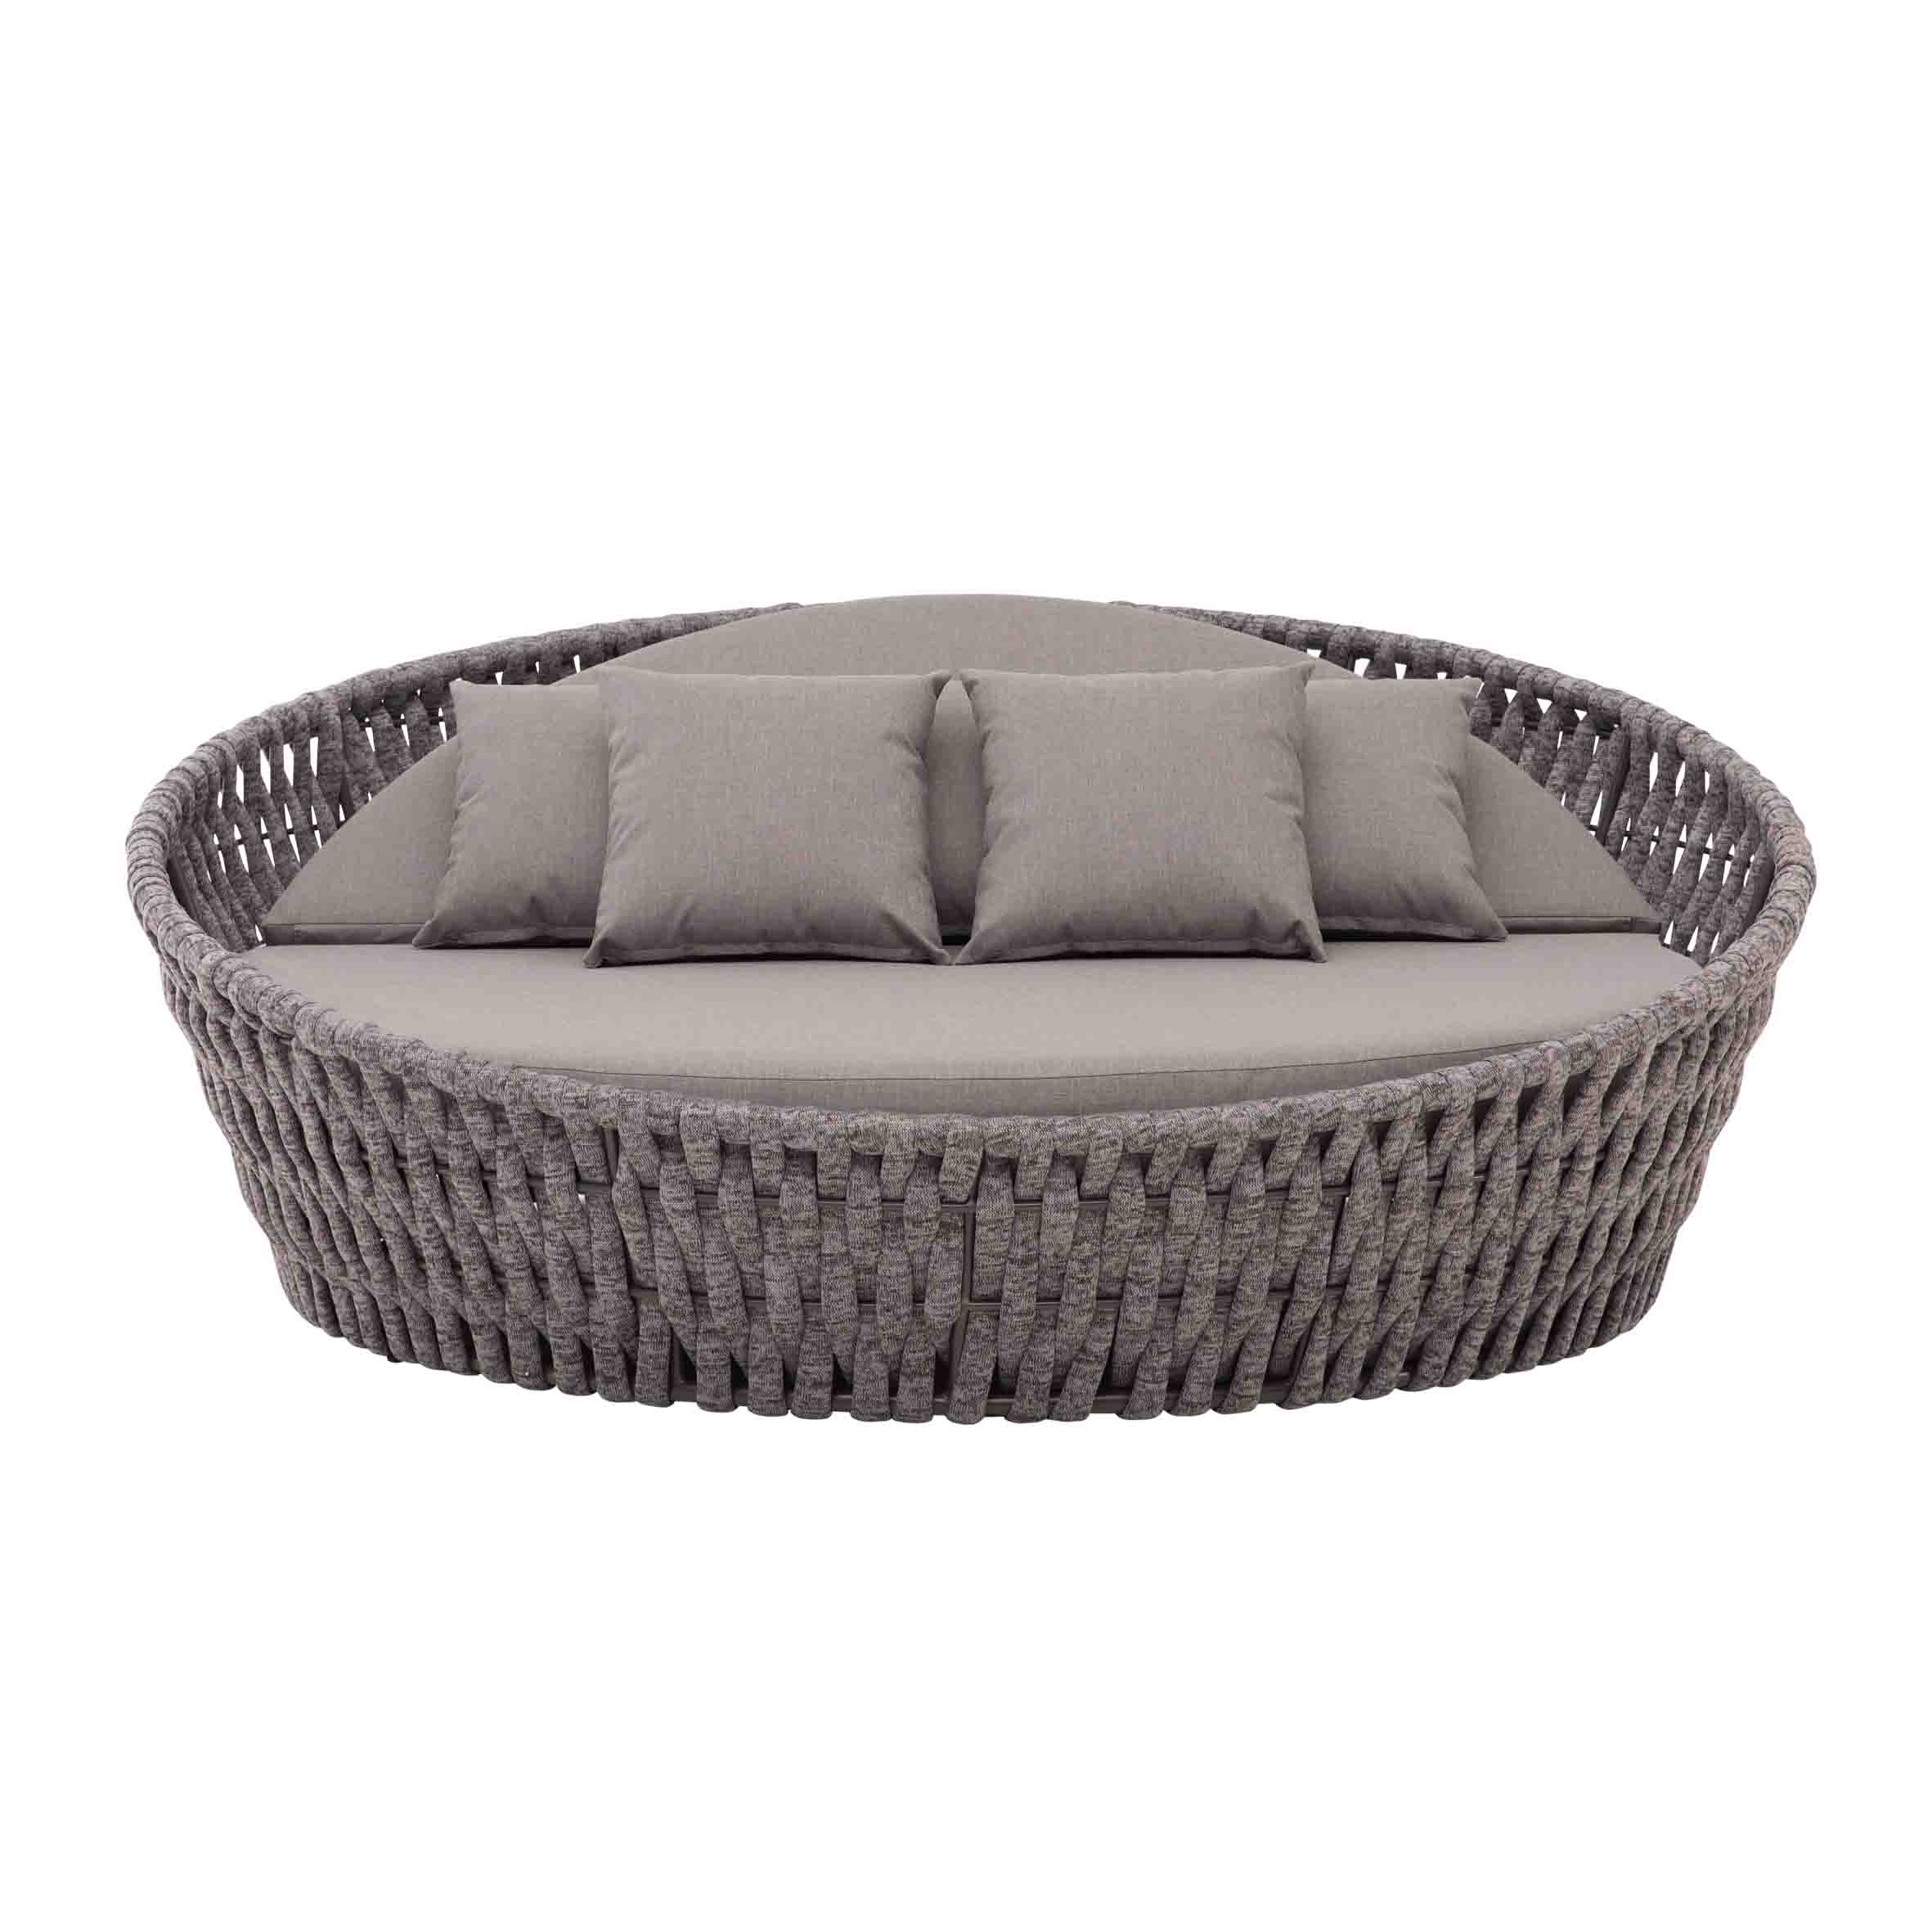 Art Rope rond daybed S12